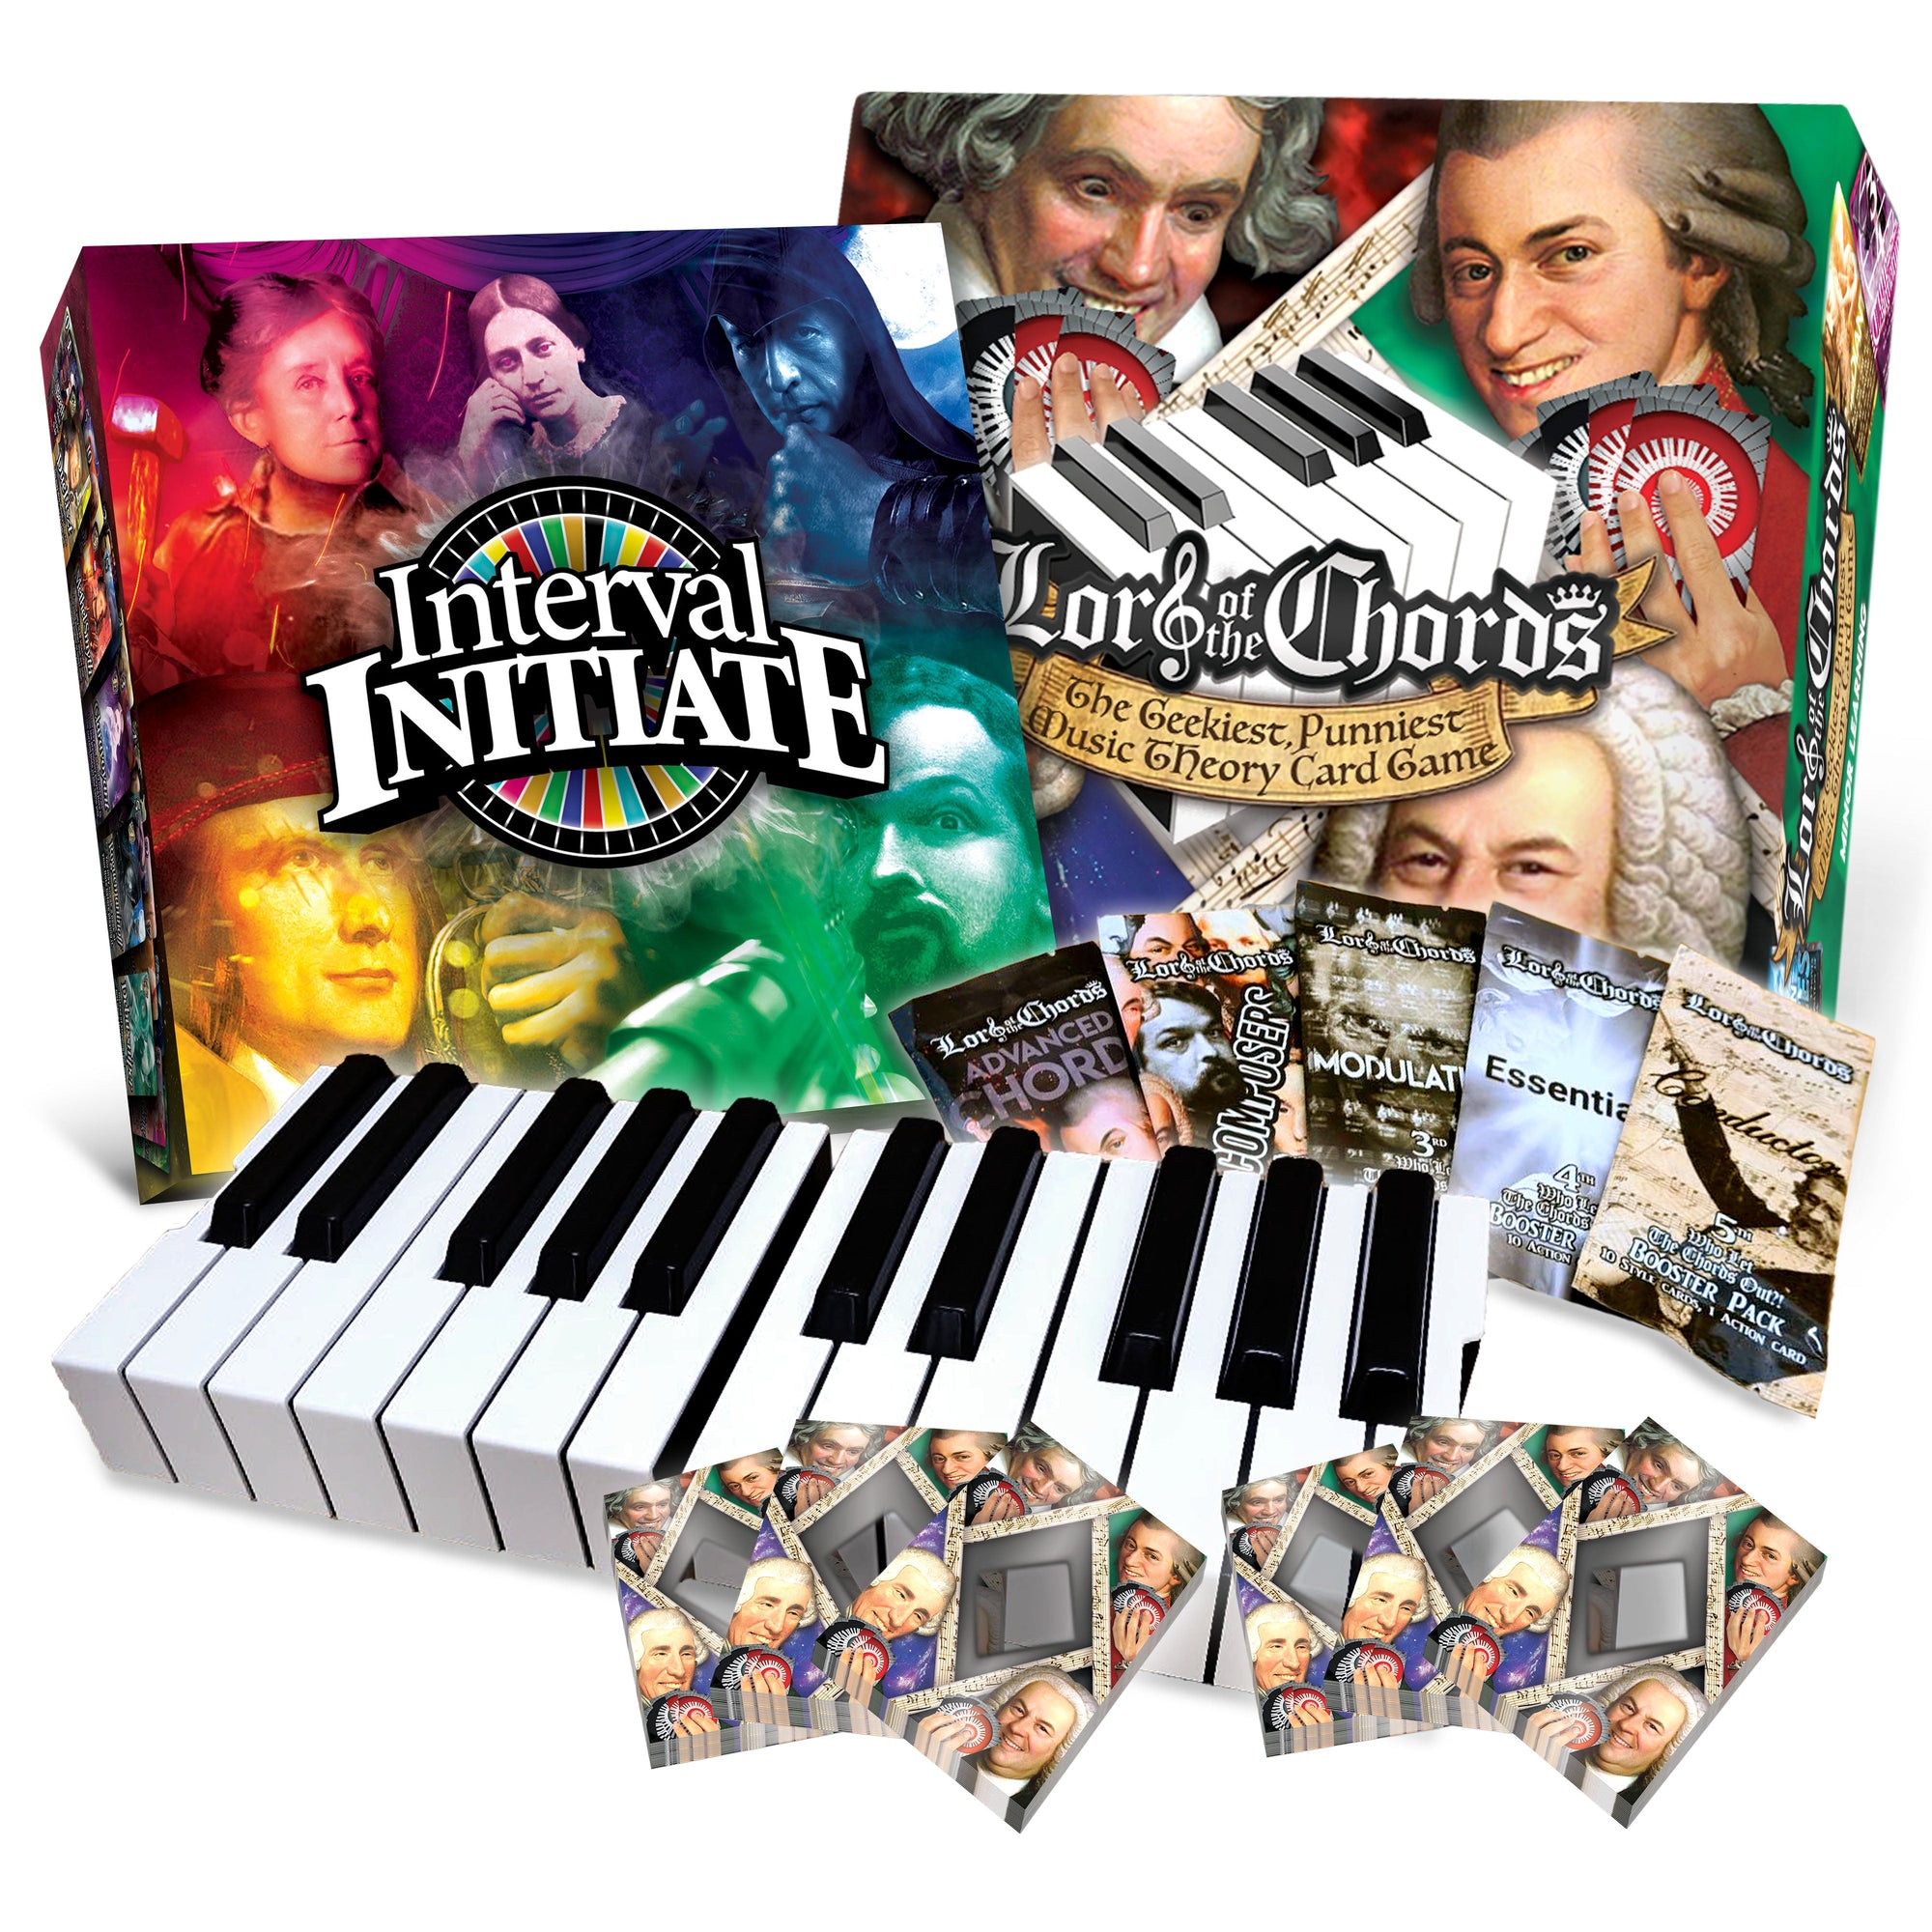 All-In(tervals) Bundle: Base Game + Expansion + Interval Initiate + Custom Sleeves [25% OFF] - Lord of the Chords